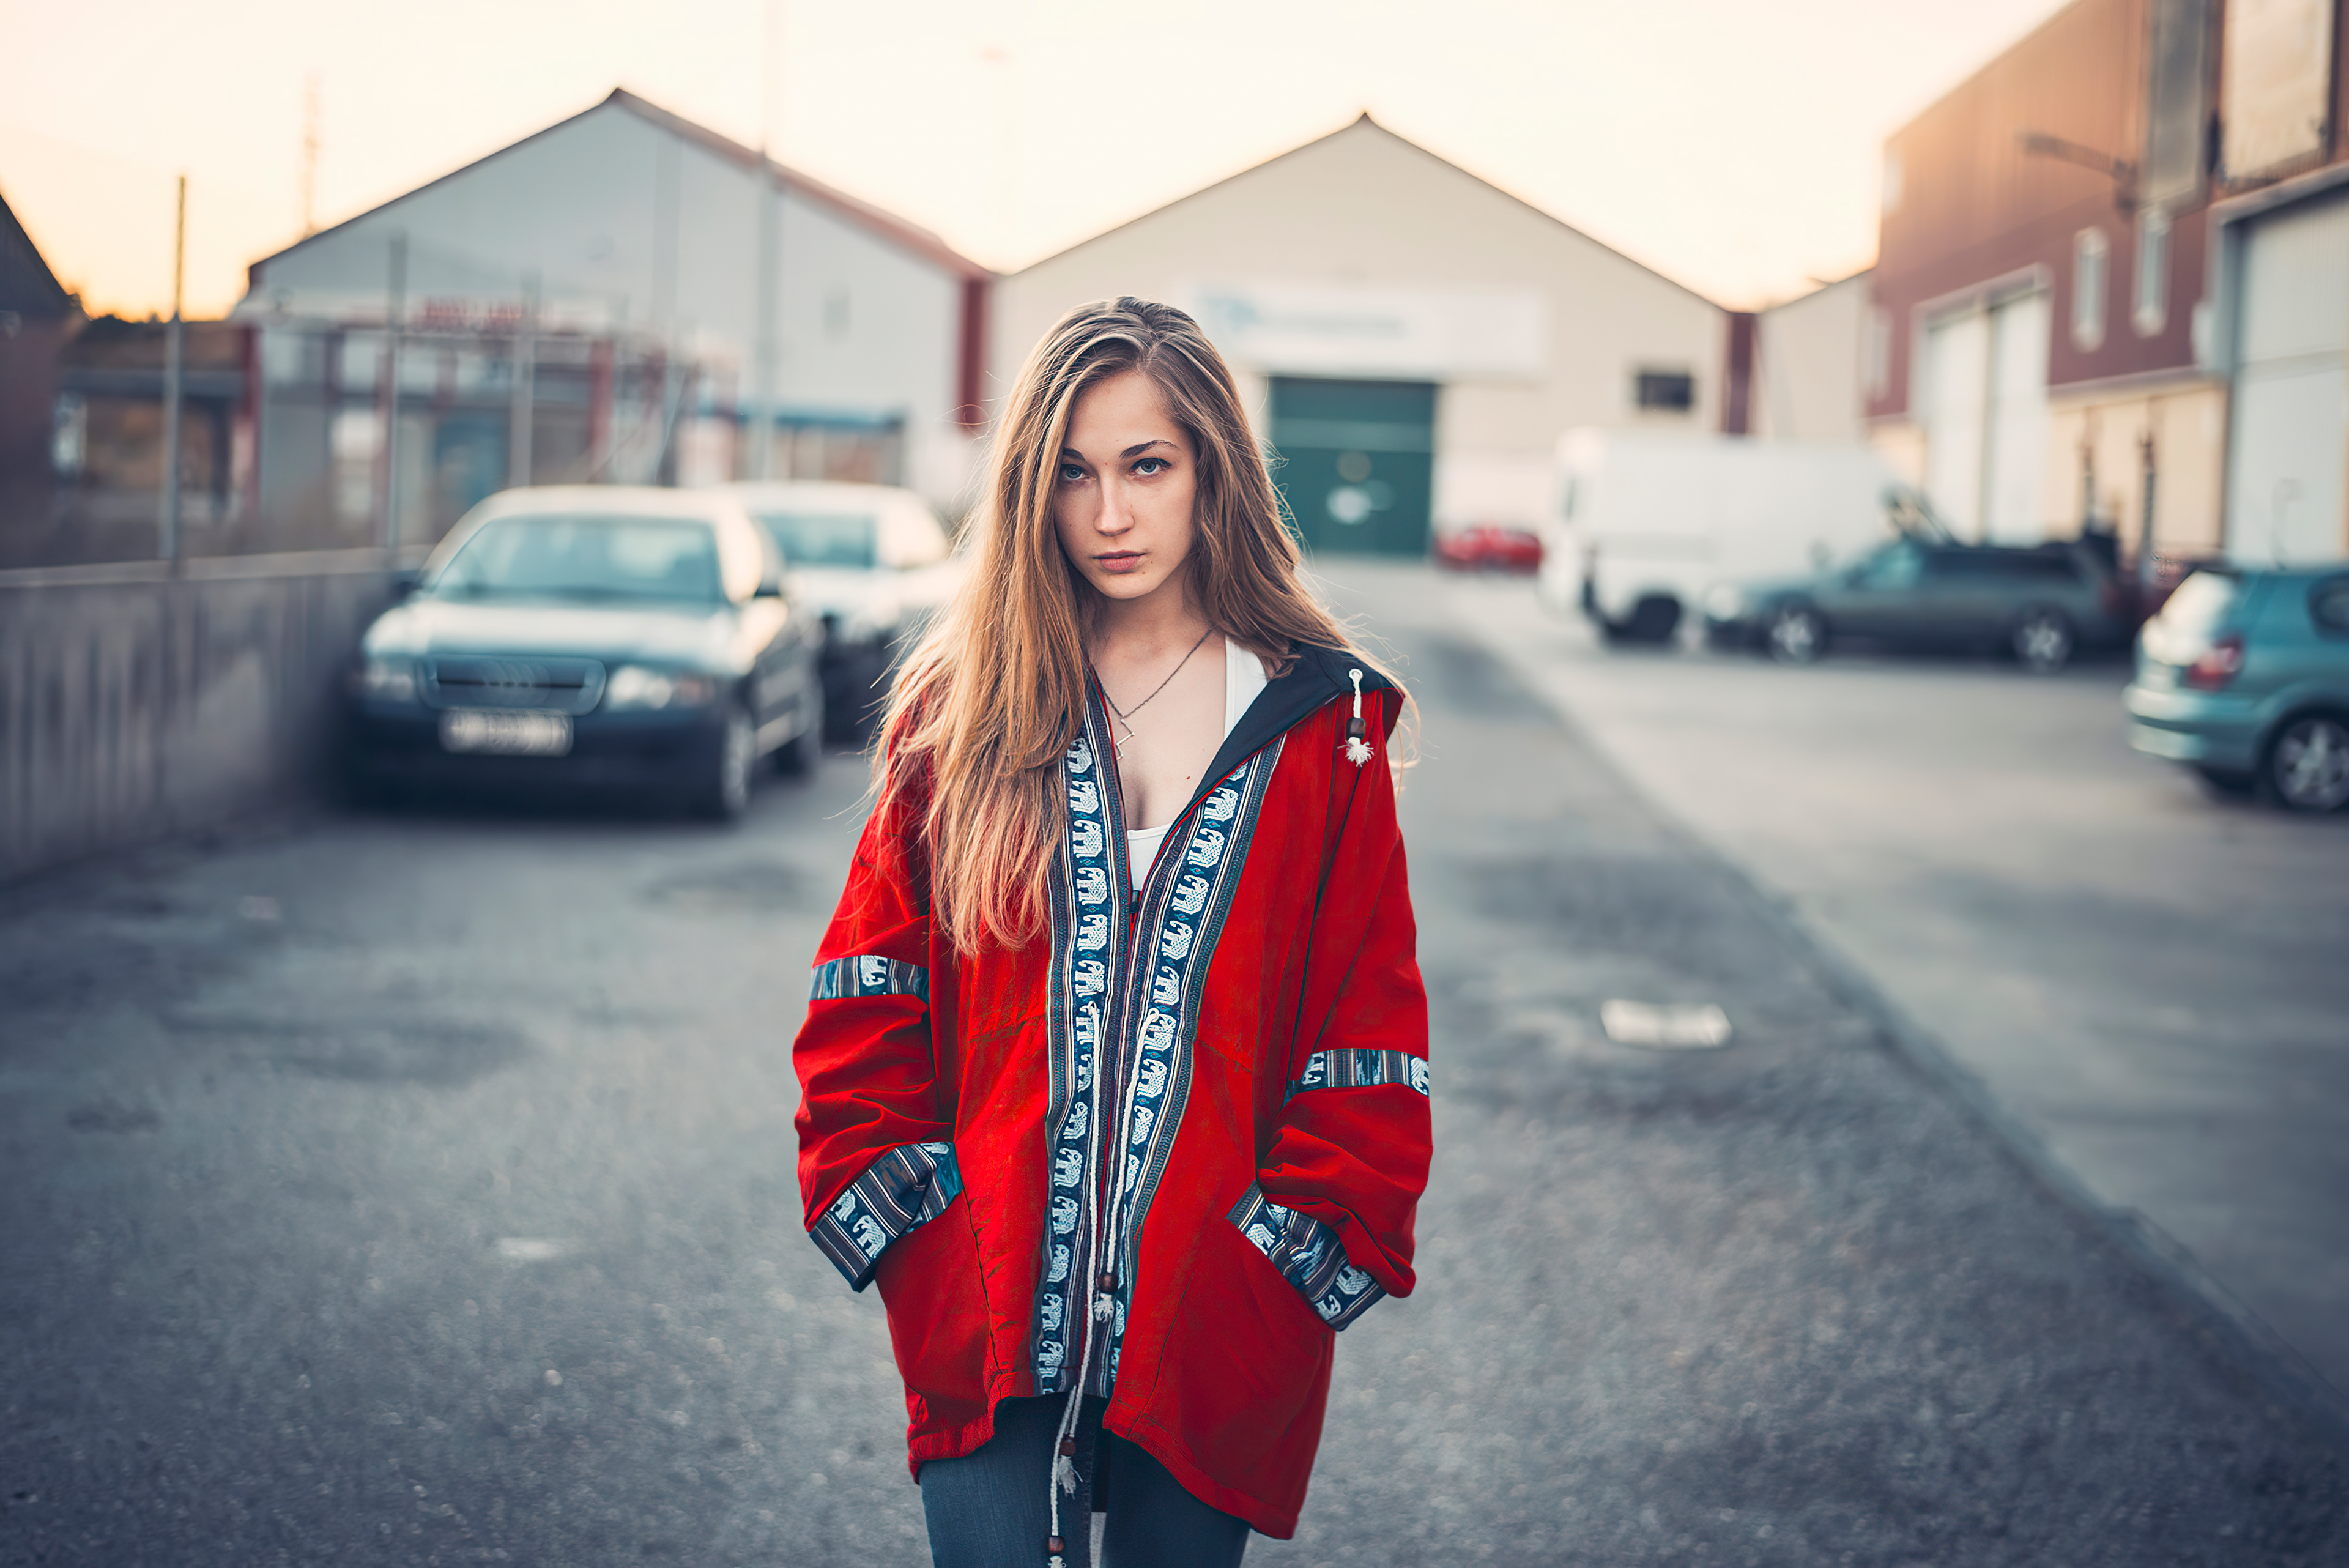 The Girl in the Red Jacket